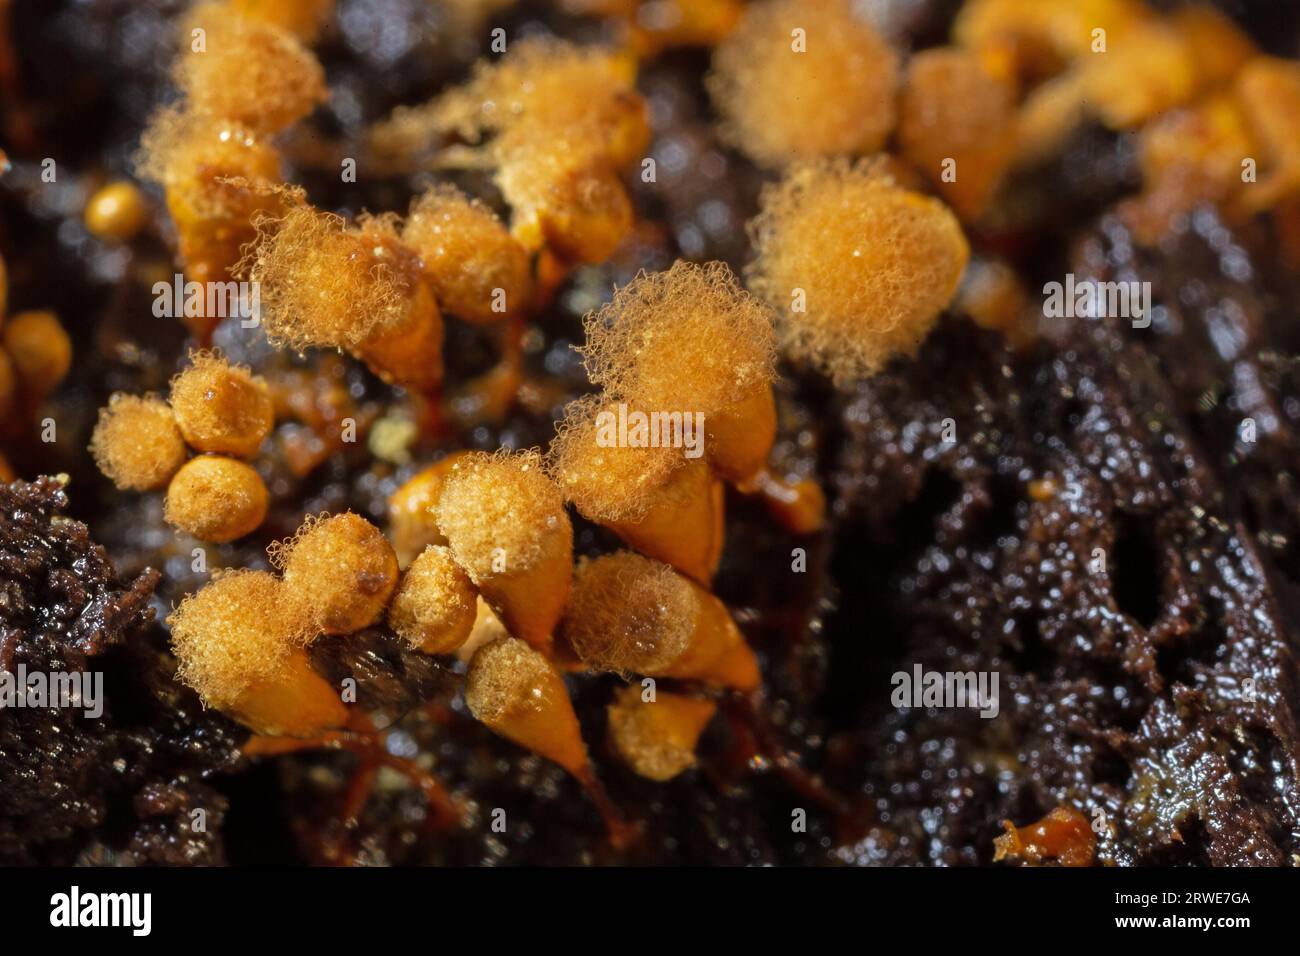 Yellow false hairy mushroom several fruiting bodies with fuzzy stalked yellowish heads next to each other on tree trunk Stock Photo